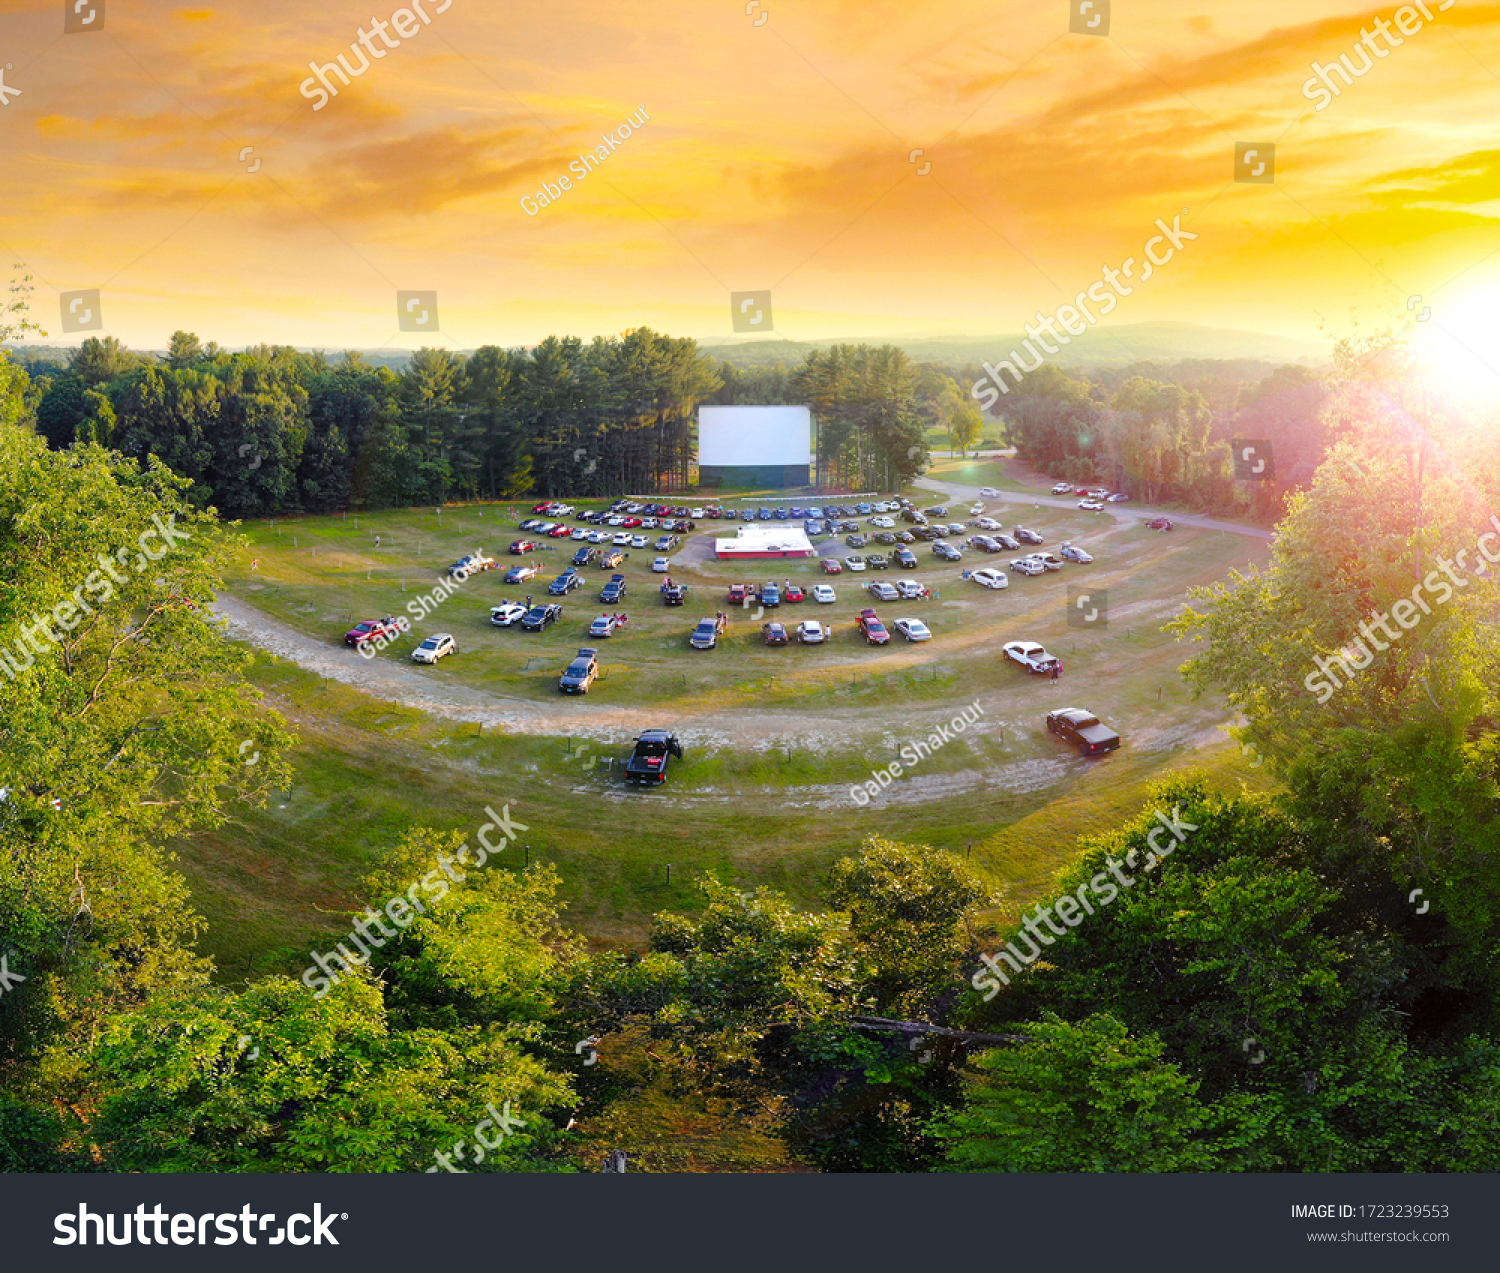 Aerial view of Northfield Drive-In Movie Theater at Sunset #1723239553